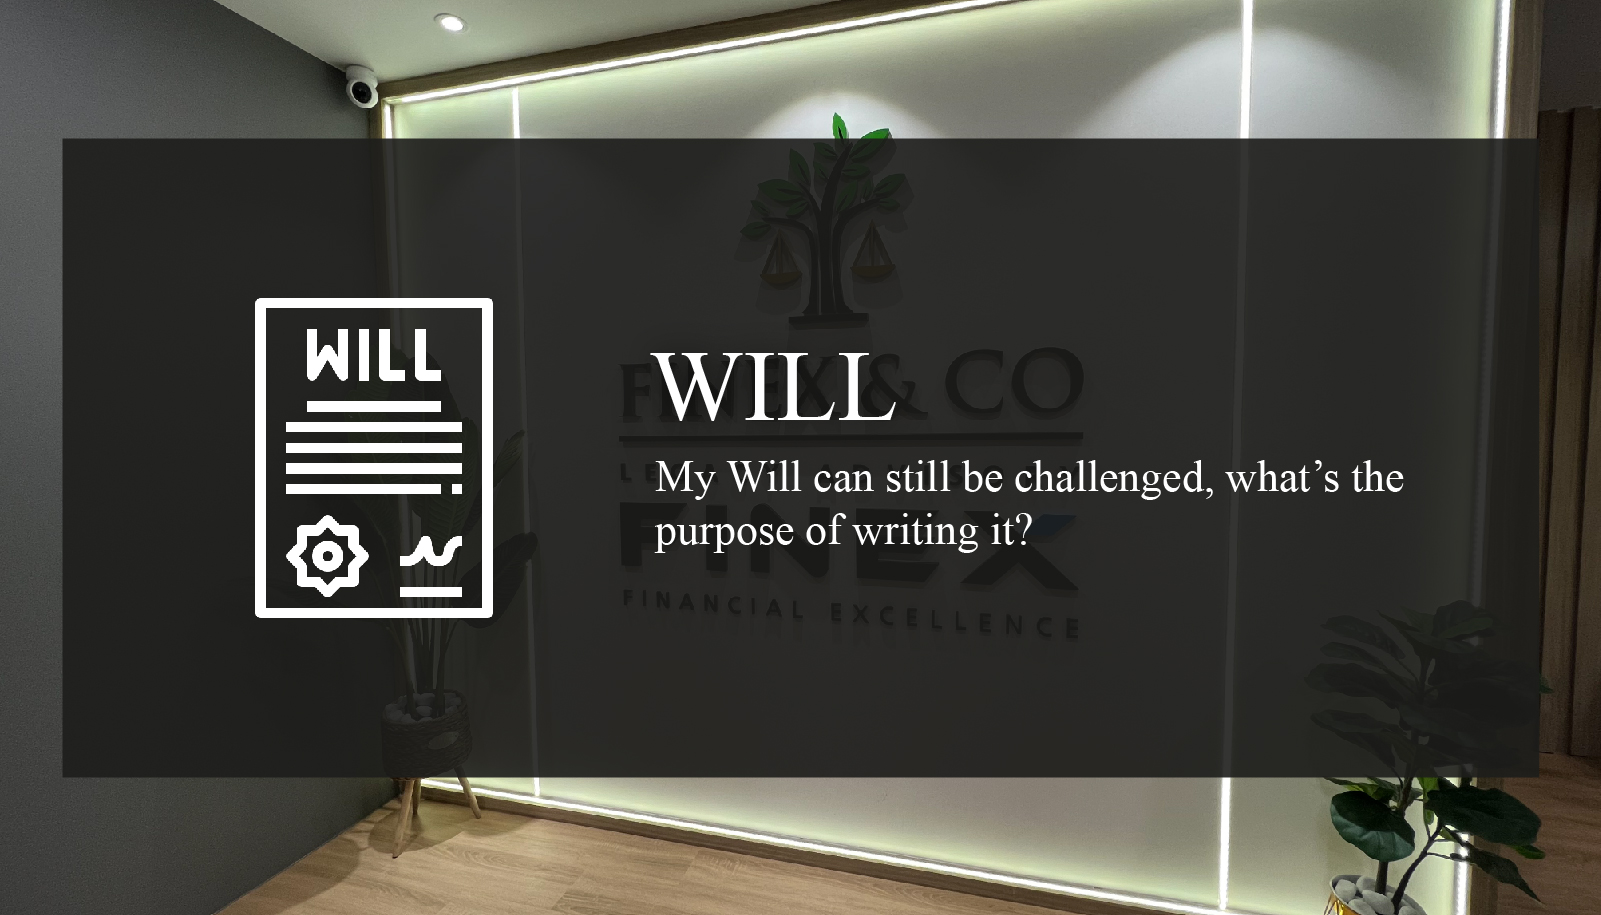 My Will can still be challenged, what’s the purpose of writing it?